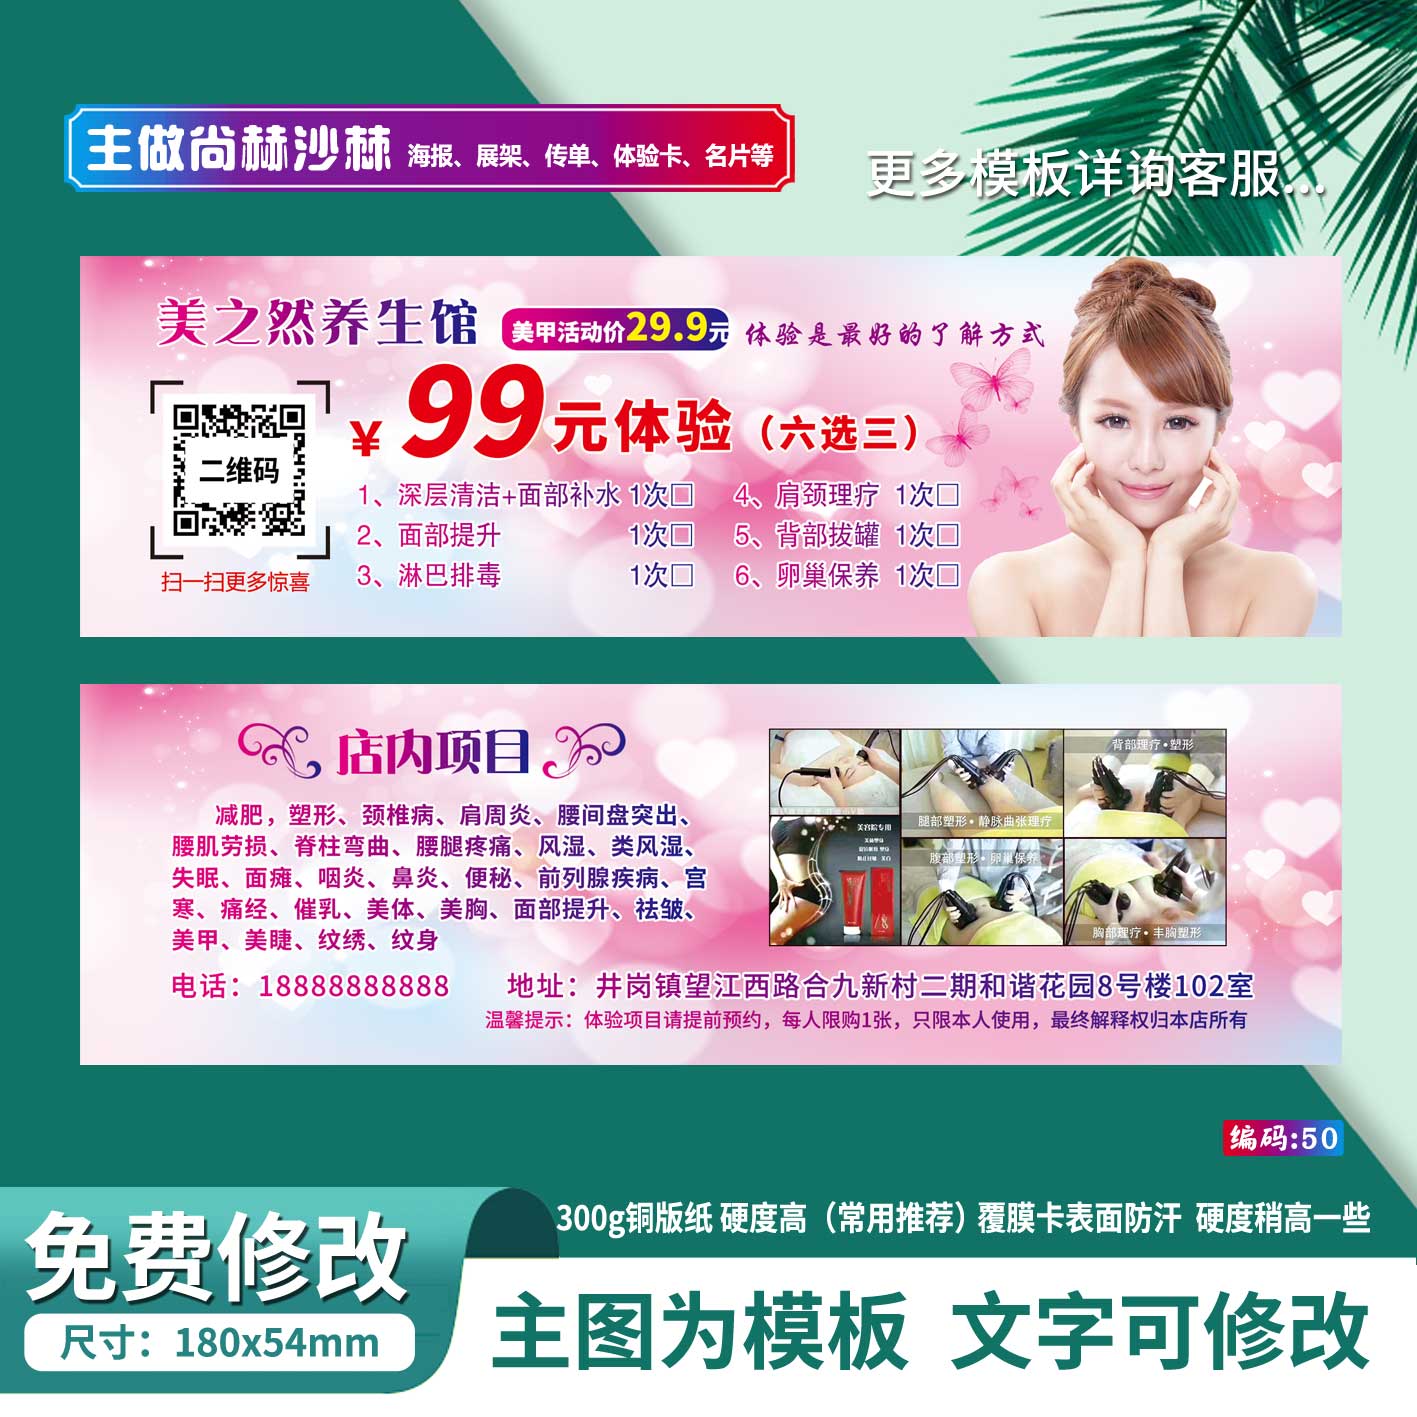 Shanghe Beauty Salon Experience Card Experience Voucher Coupon Discount Card Voucher Toll Card Promotional Card Cash Coupon